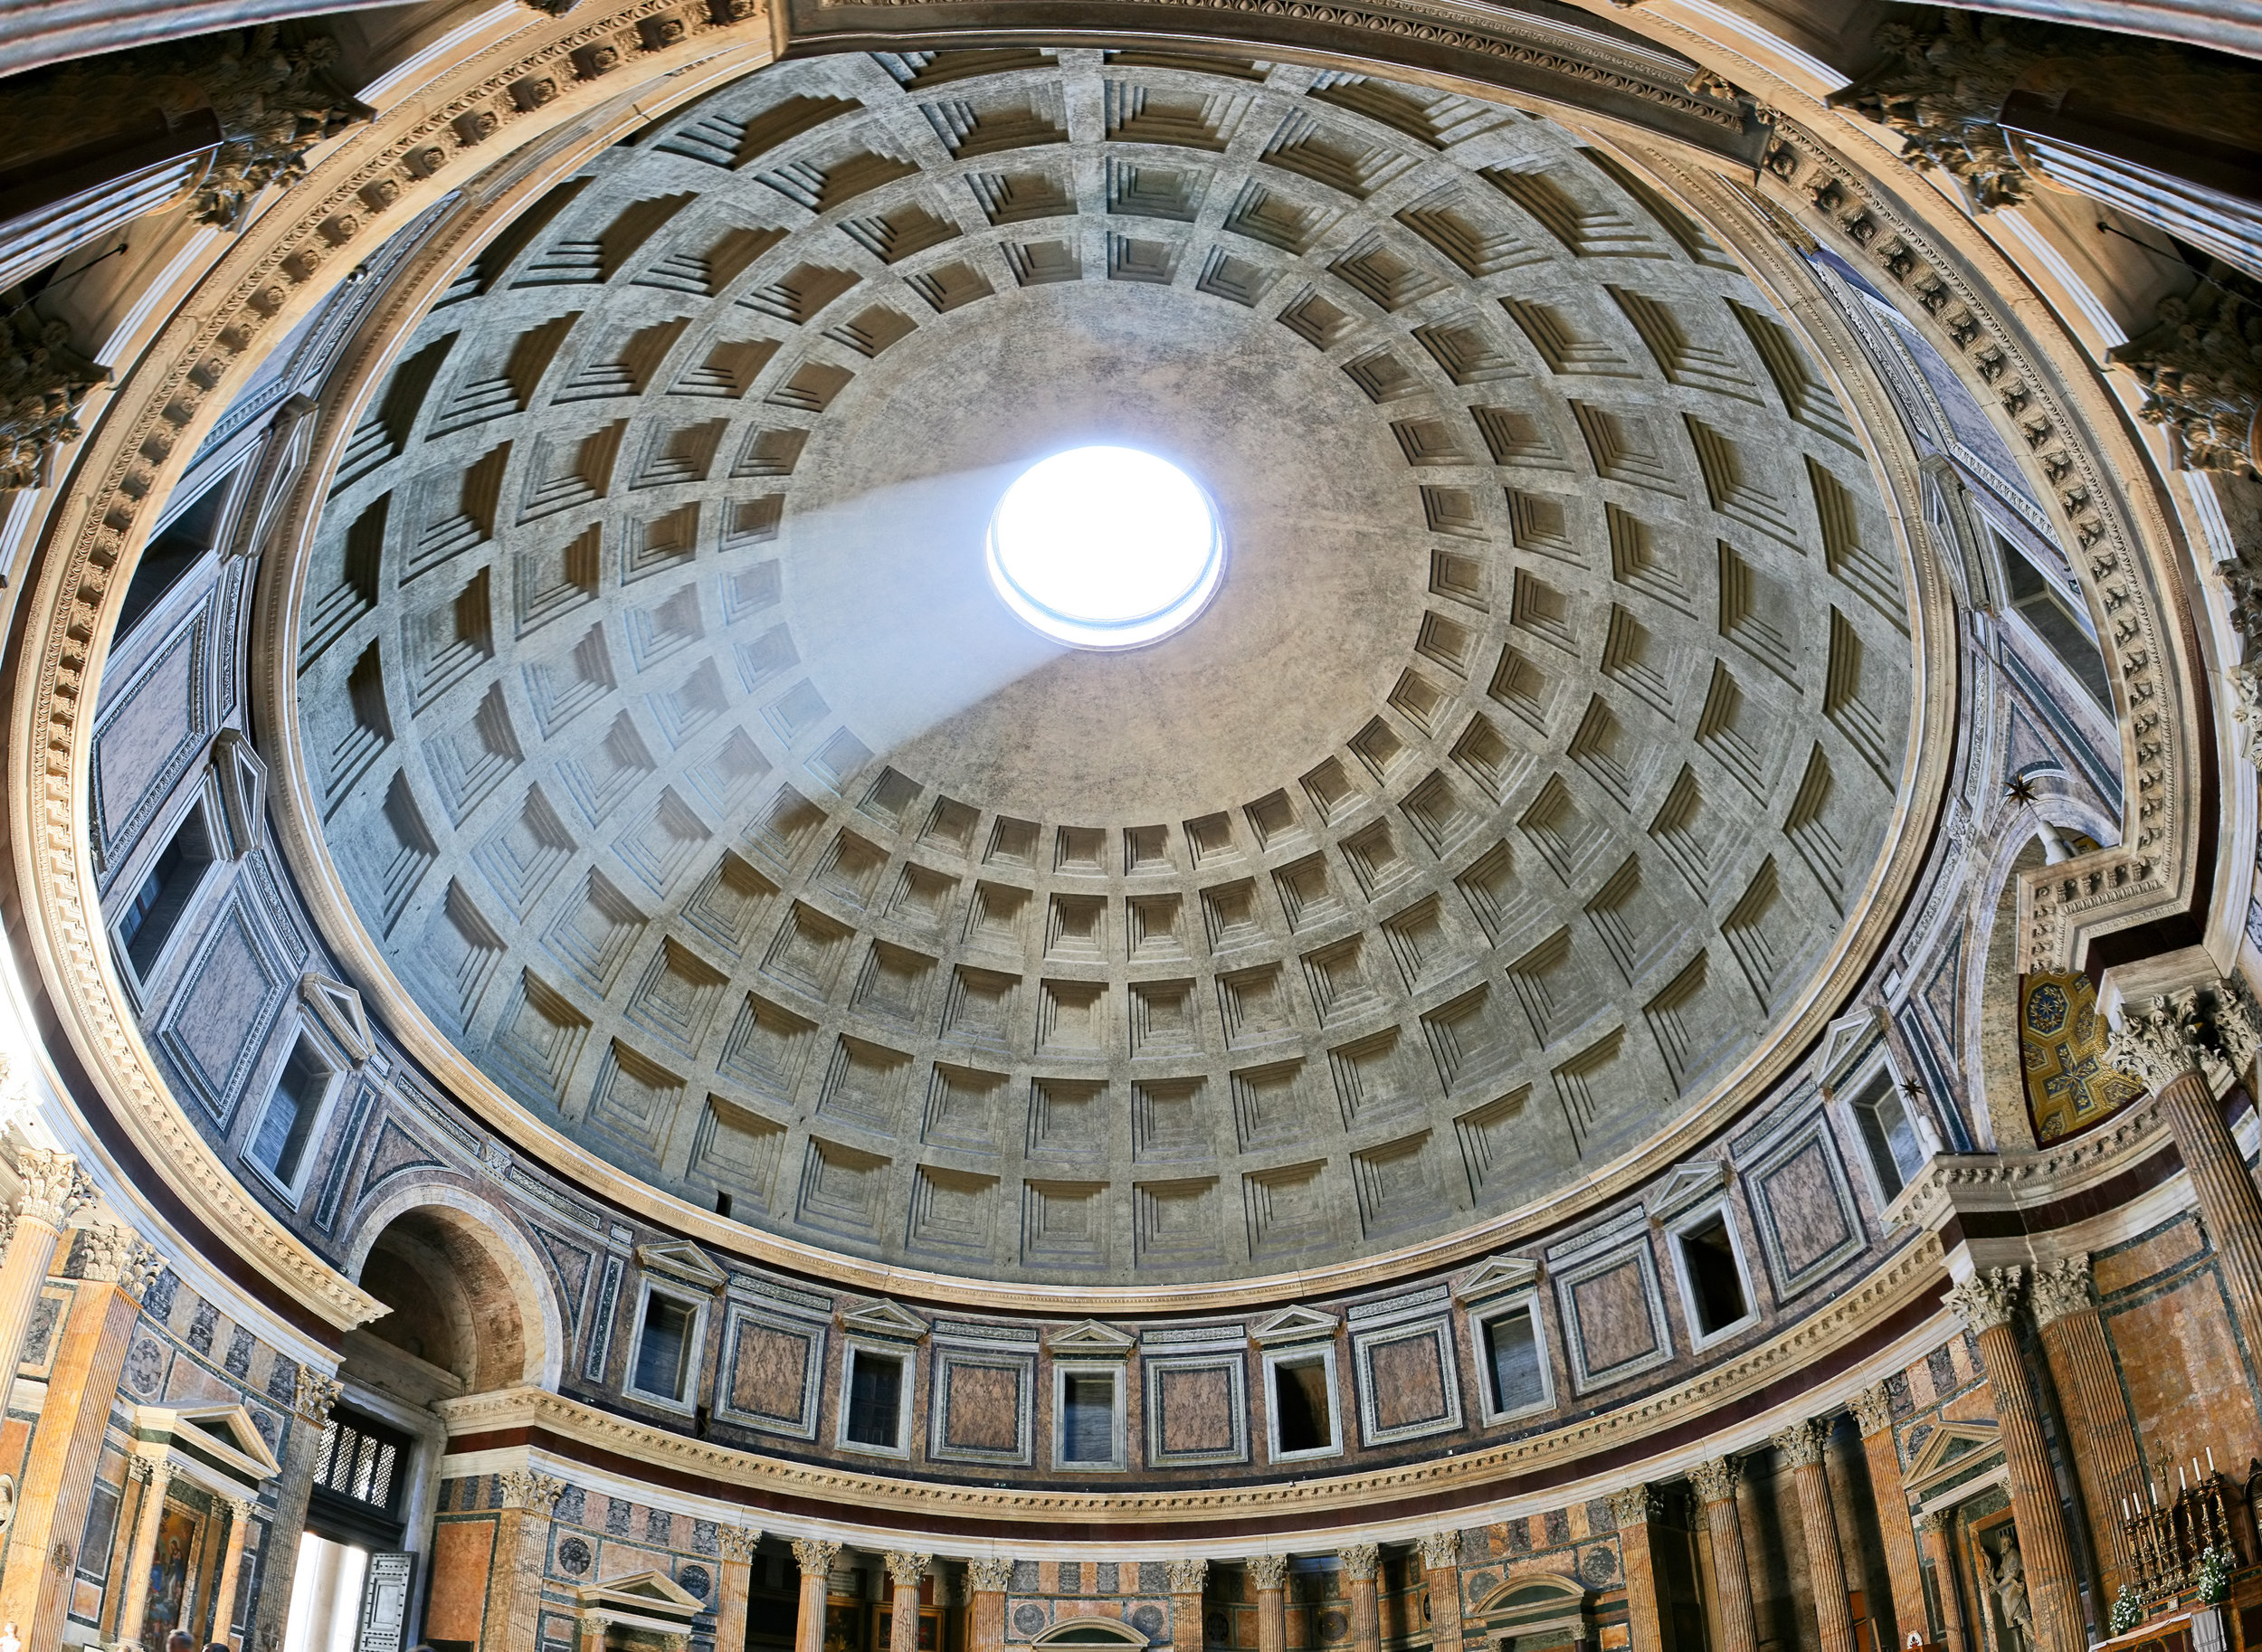 Ancient-architectural-masterpiece-of-Pantheon-in-Roma,-Italy-131477912_3000x2191.jpeg